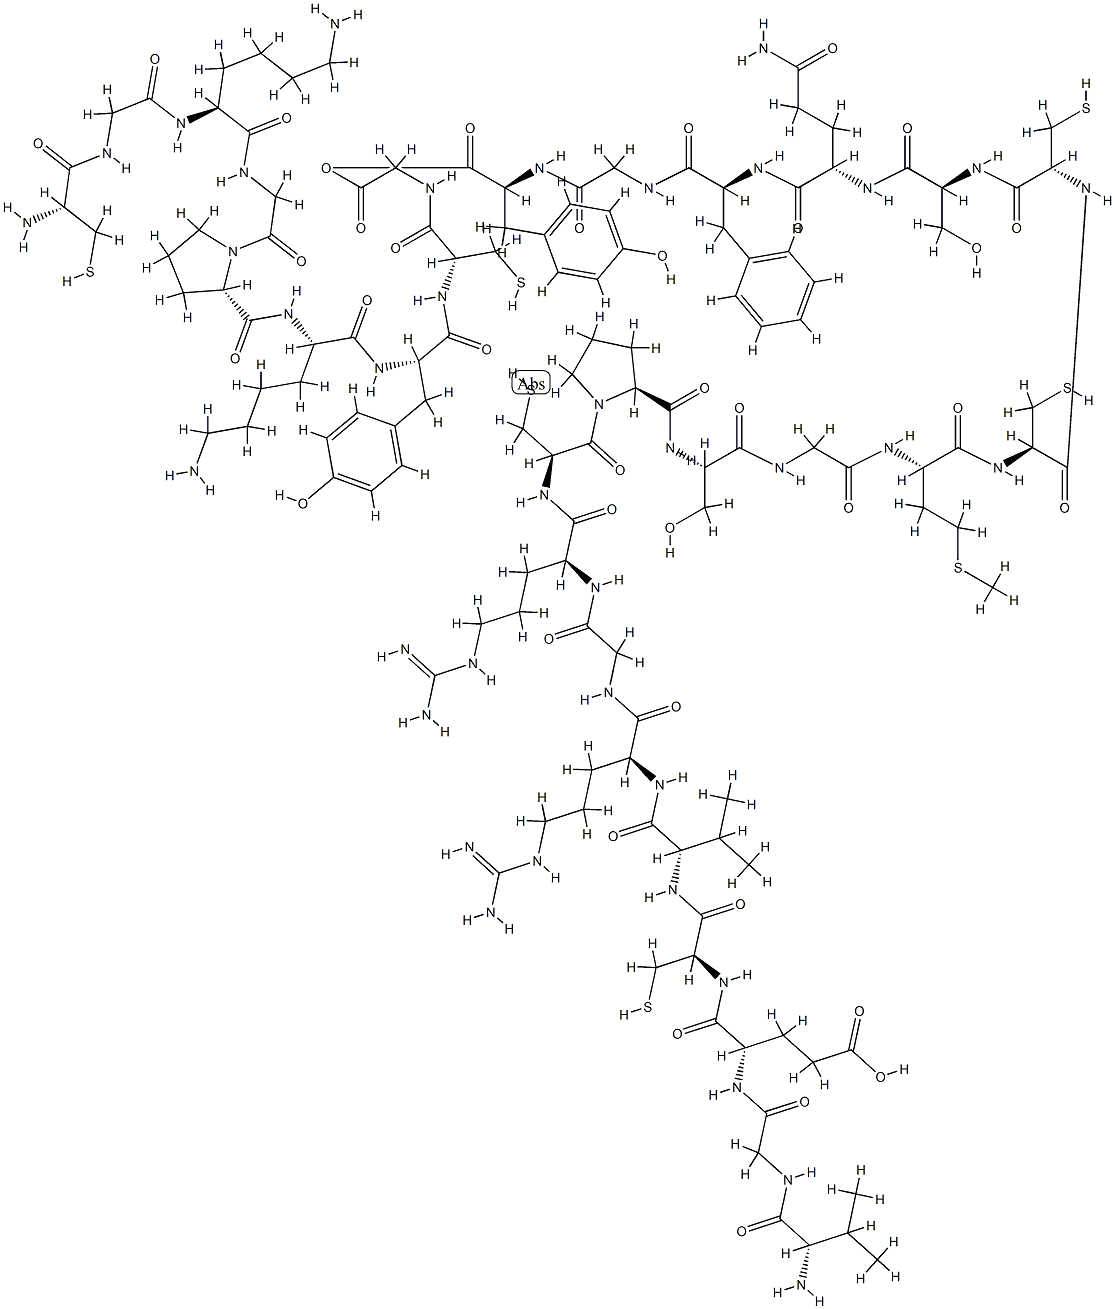 antimicrobial peptide 1, plant Structure